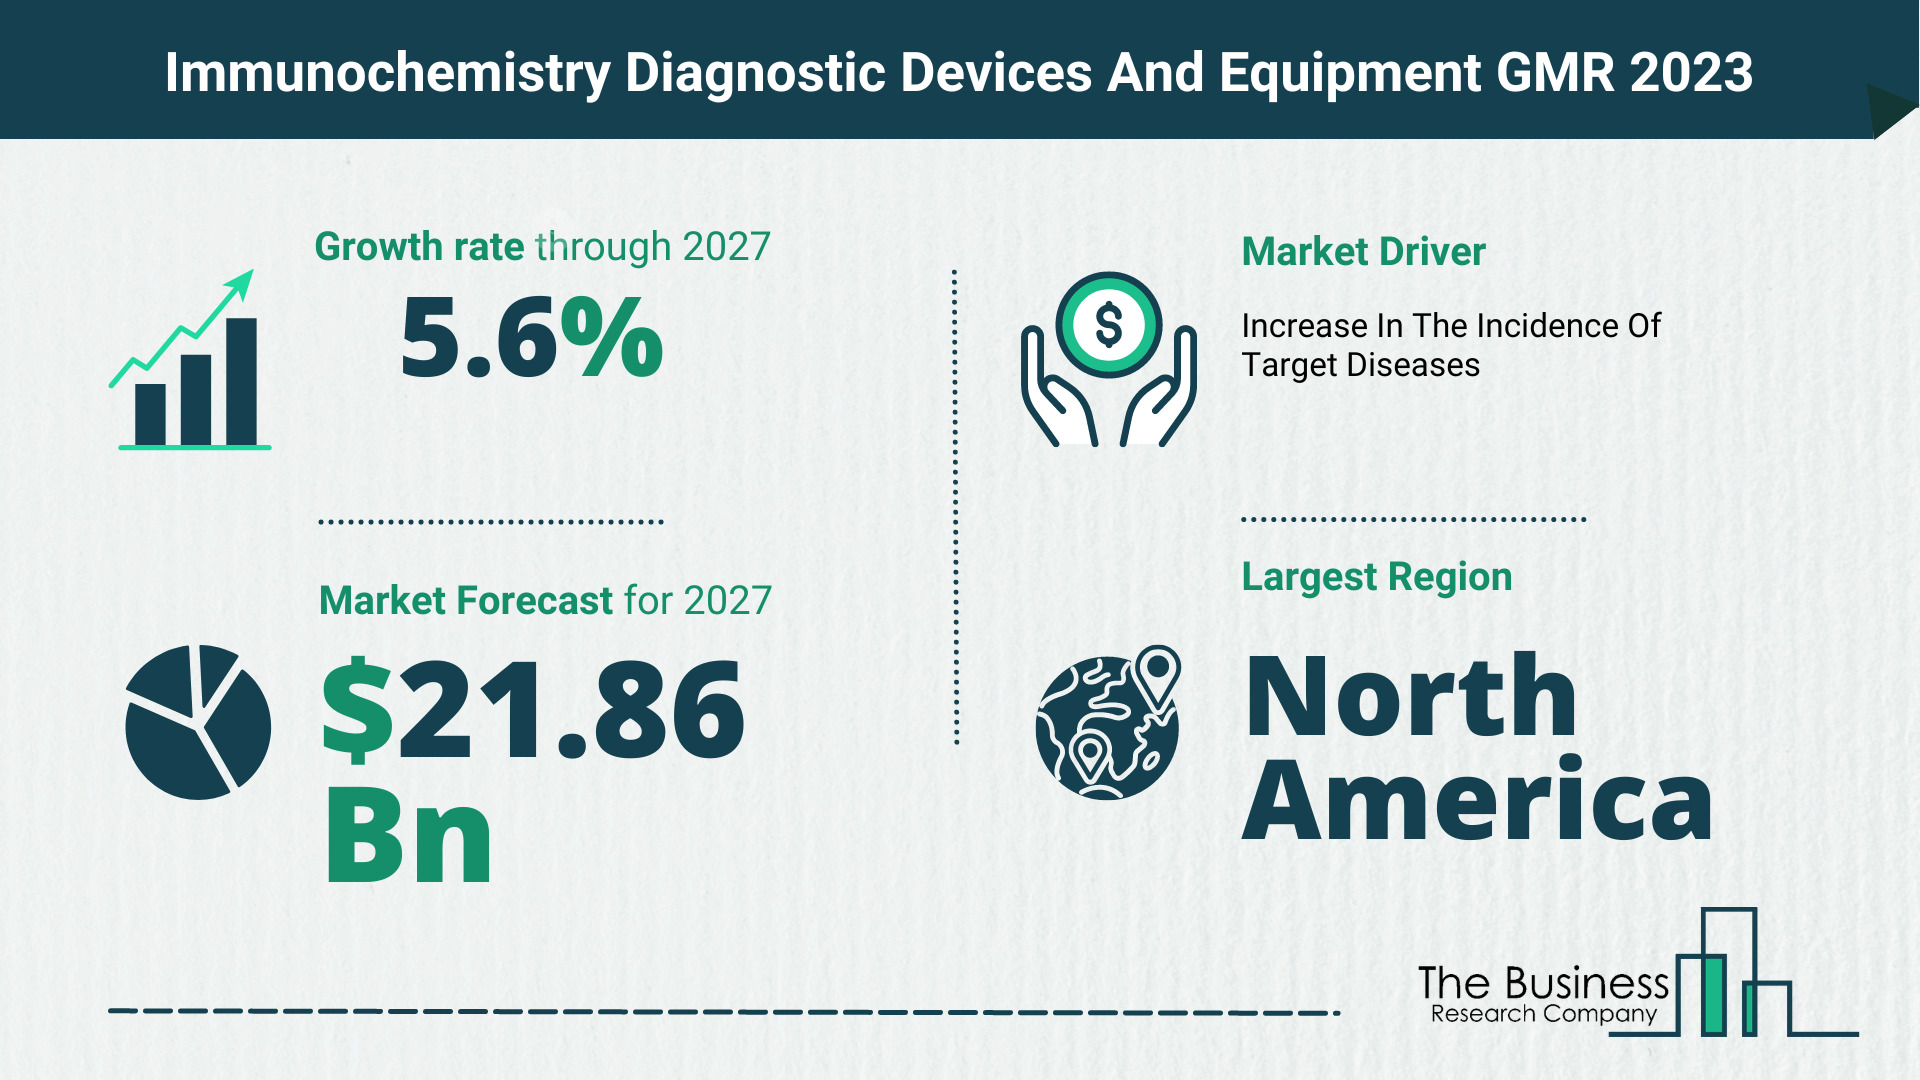 Global Immunochemistry Diagnostic Devices And Equipment Market Size